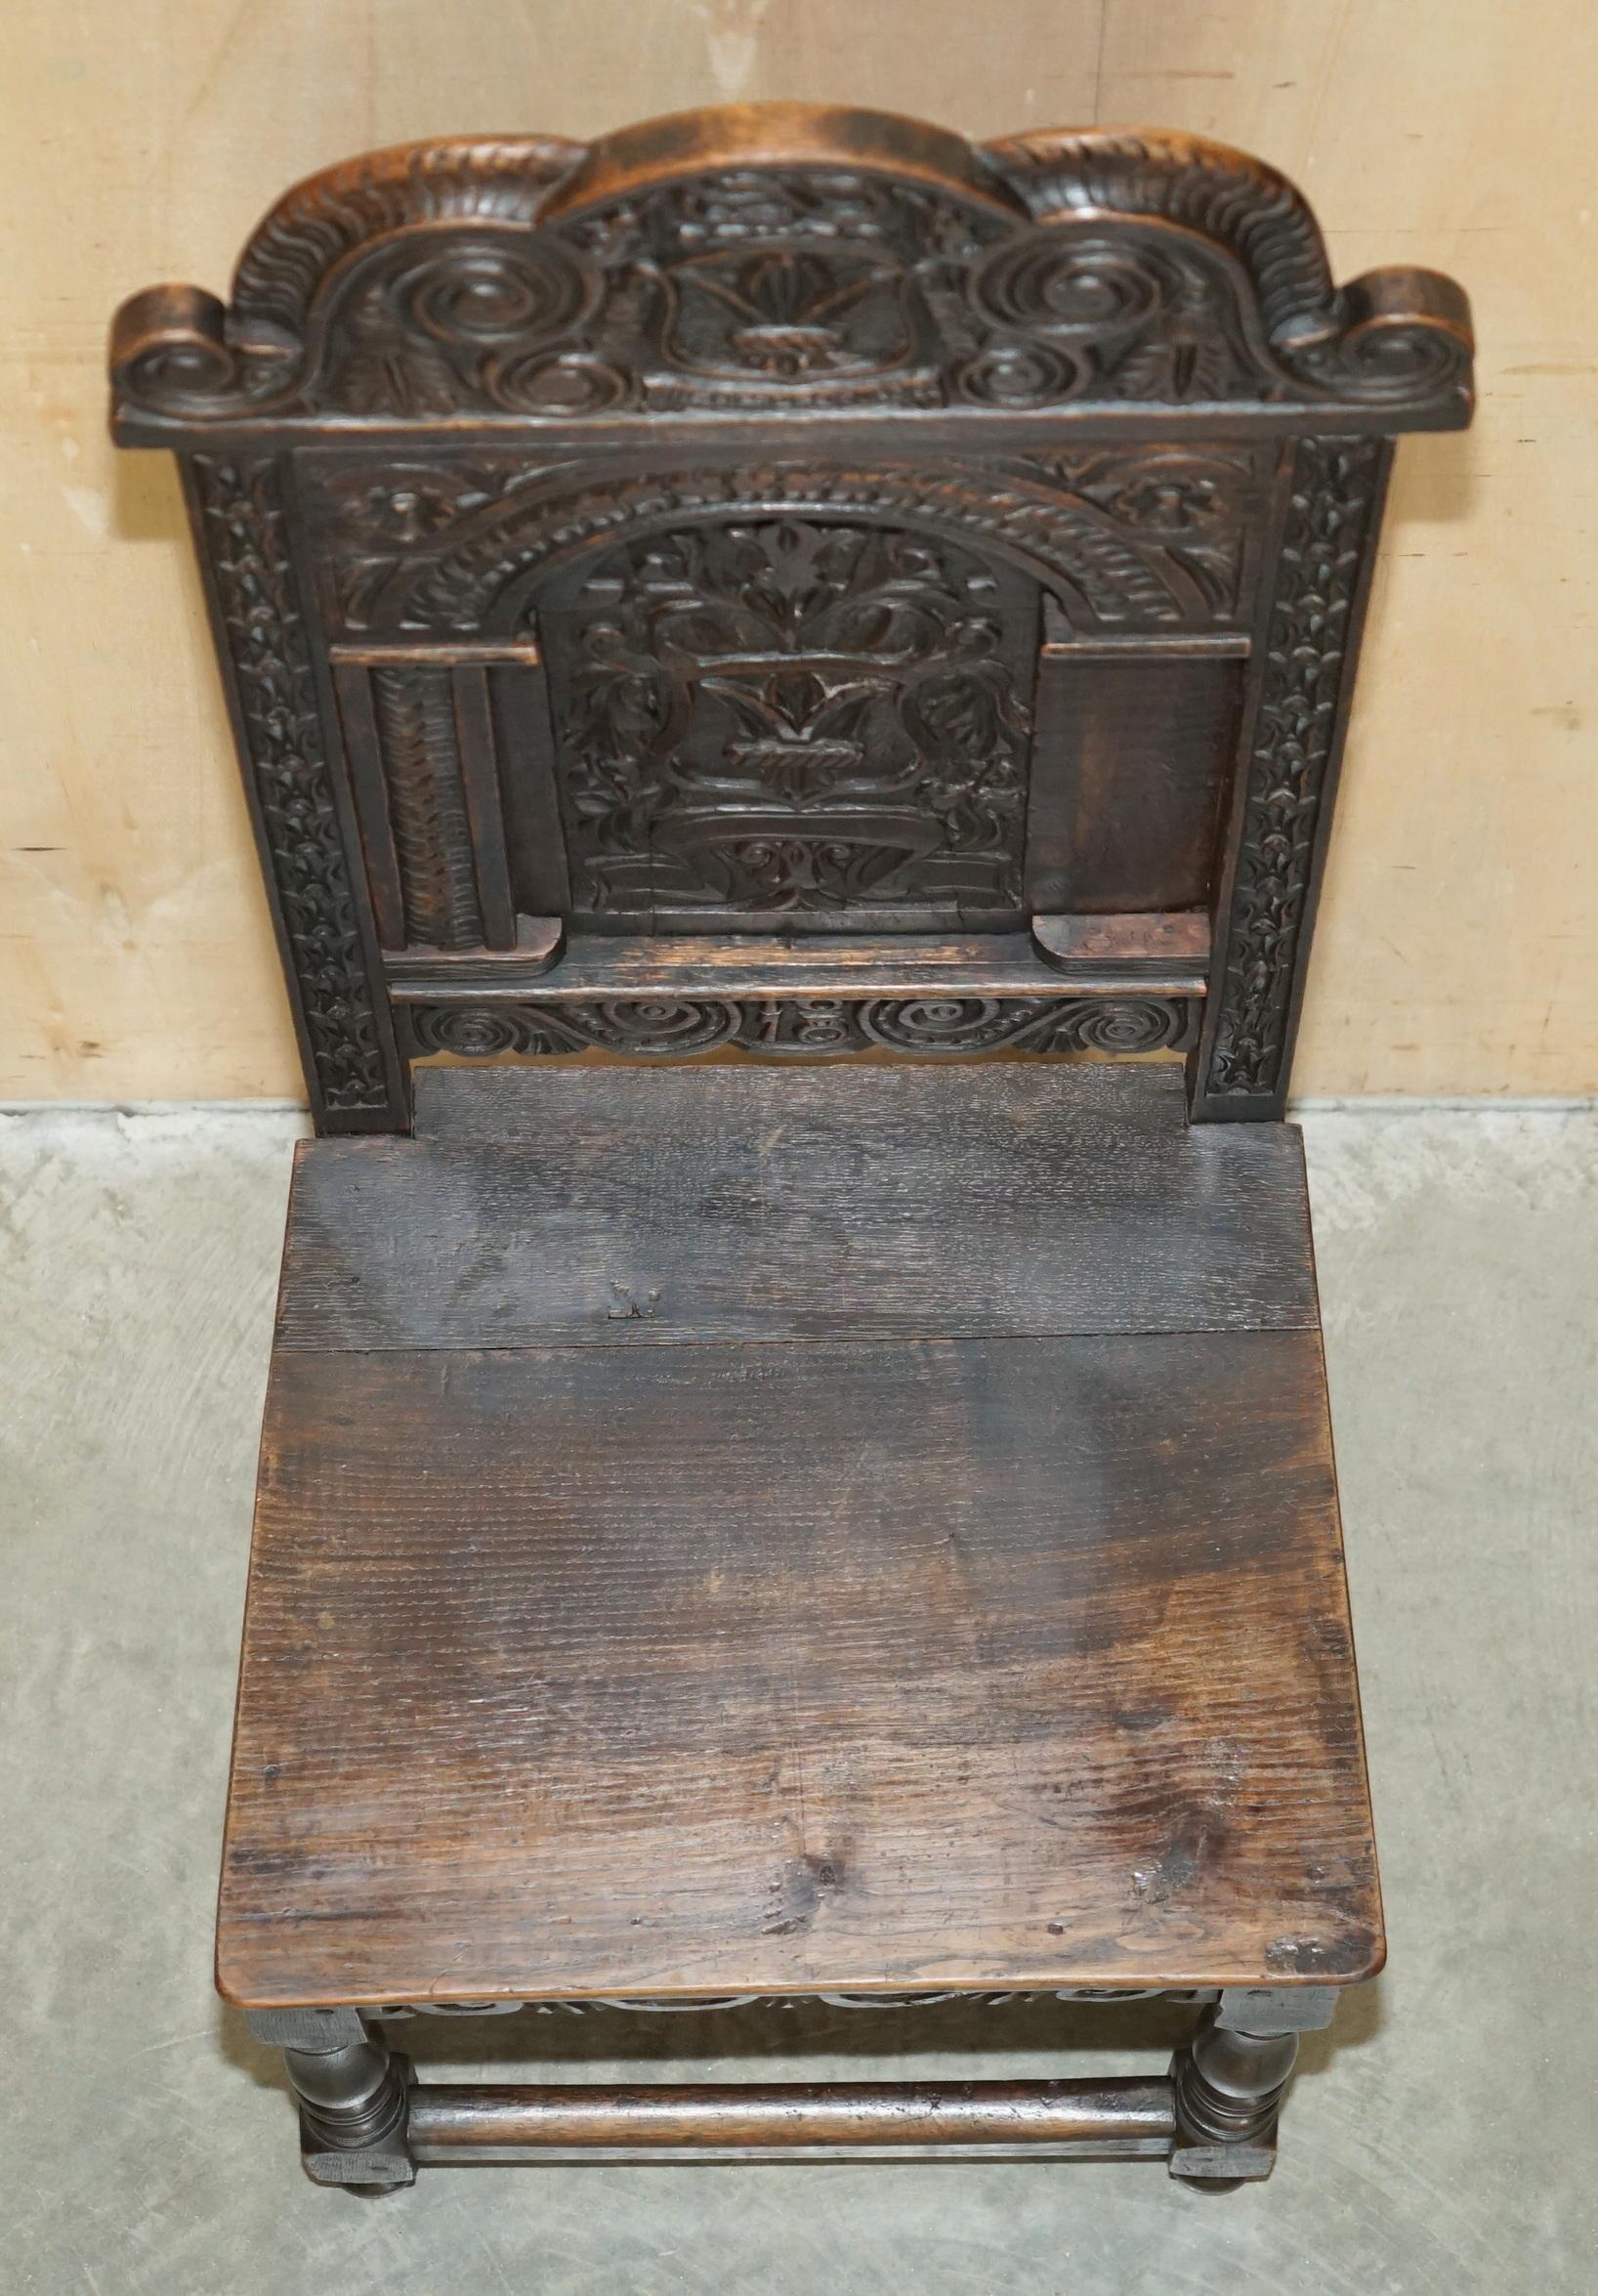 ANTIQUE PAIR OF 17TH CENTURY JACOBEAN ENGLISH OAK CHAIRS FROM THE FILM HELLBOy im Angebot 12